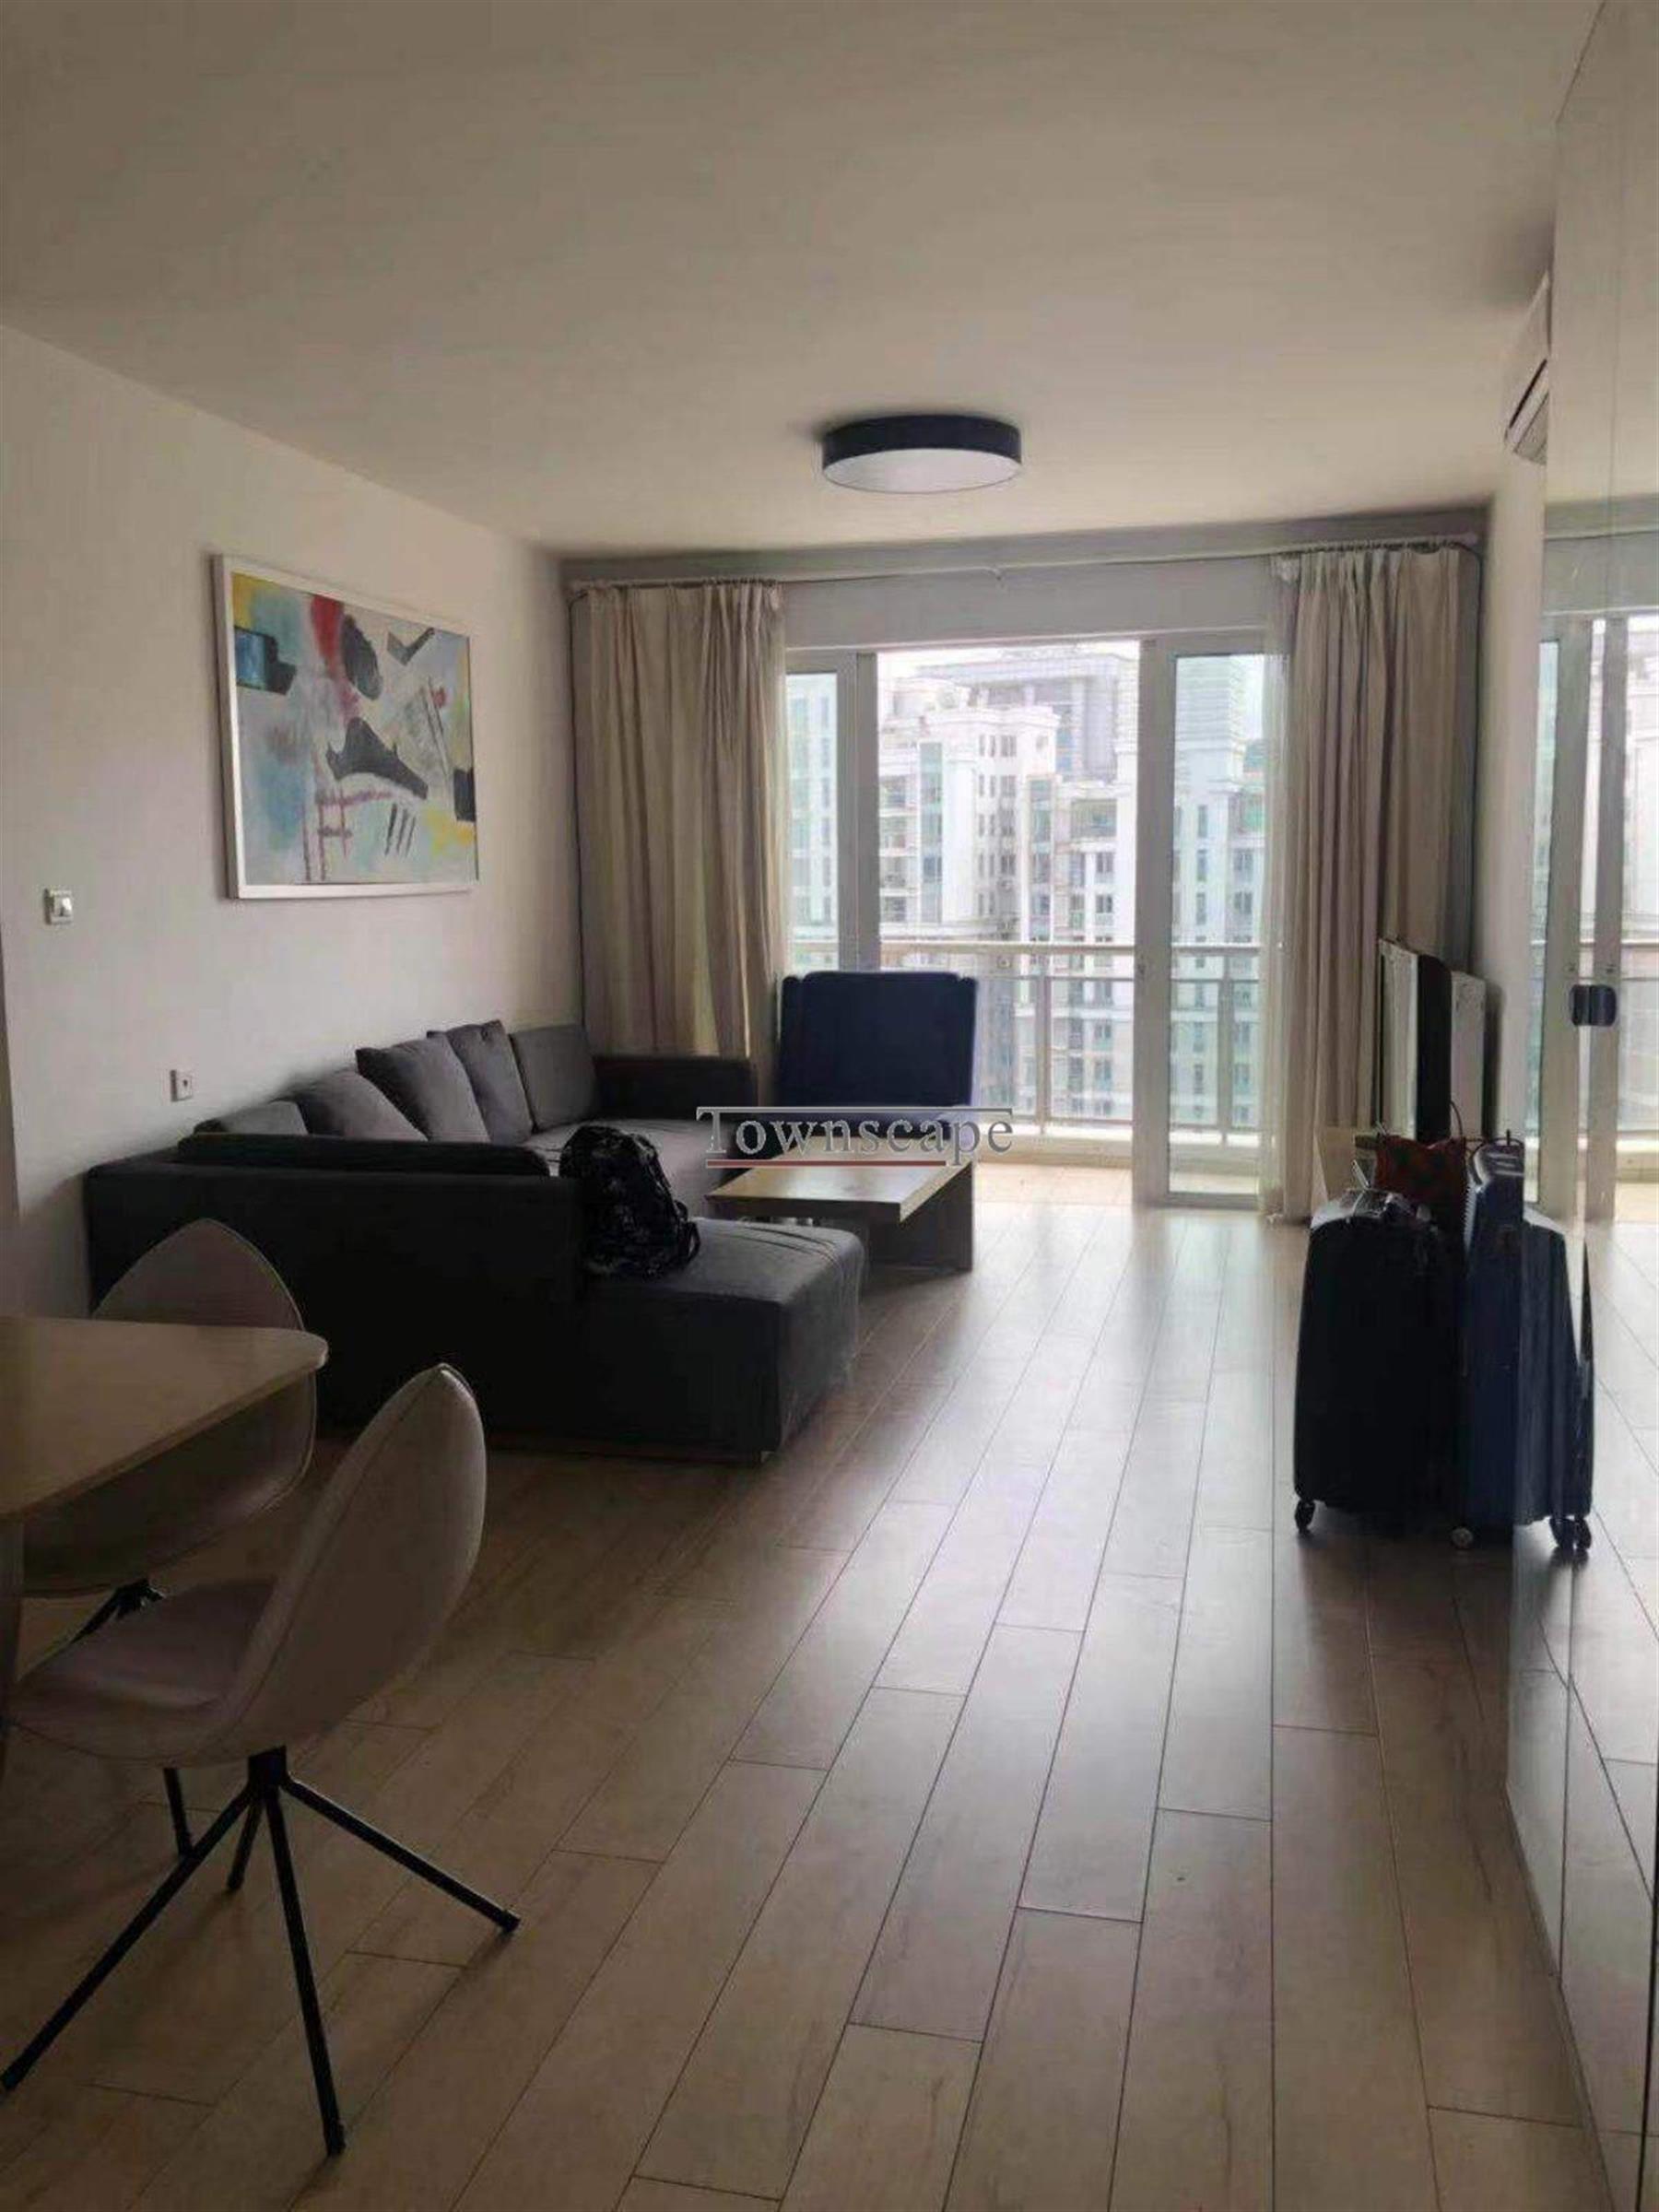 open living room Newly Renovated High Floor Apt w Great Views in Xujiahui La Cite or Rent